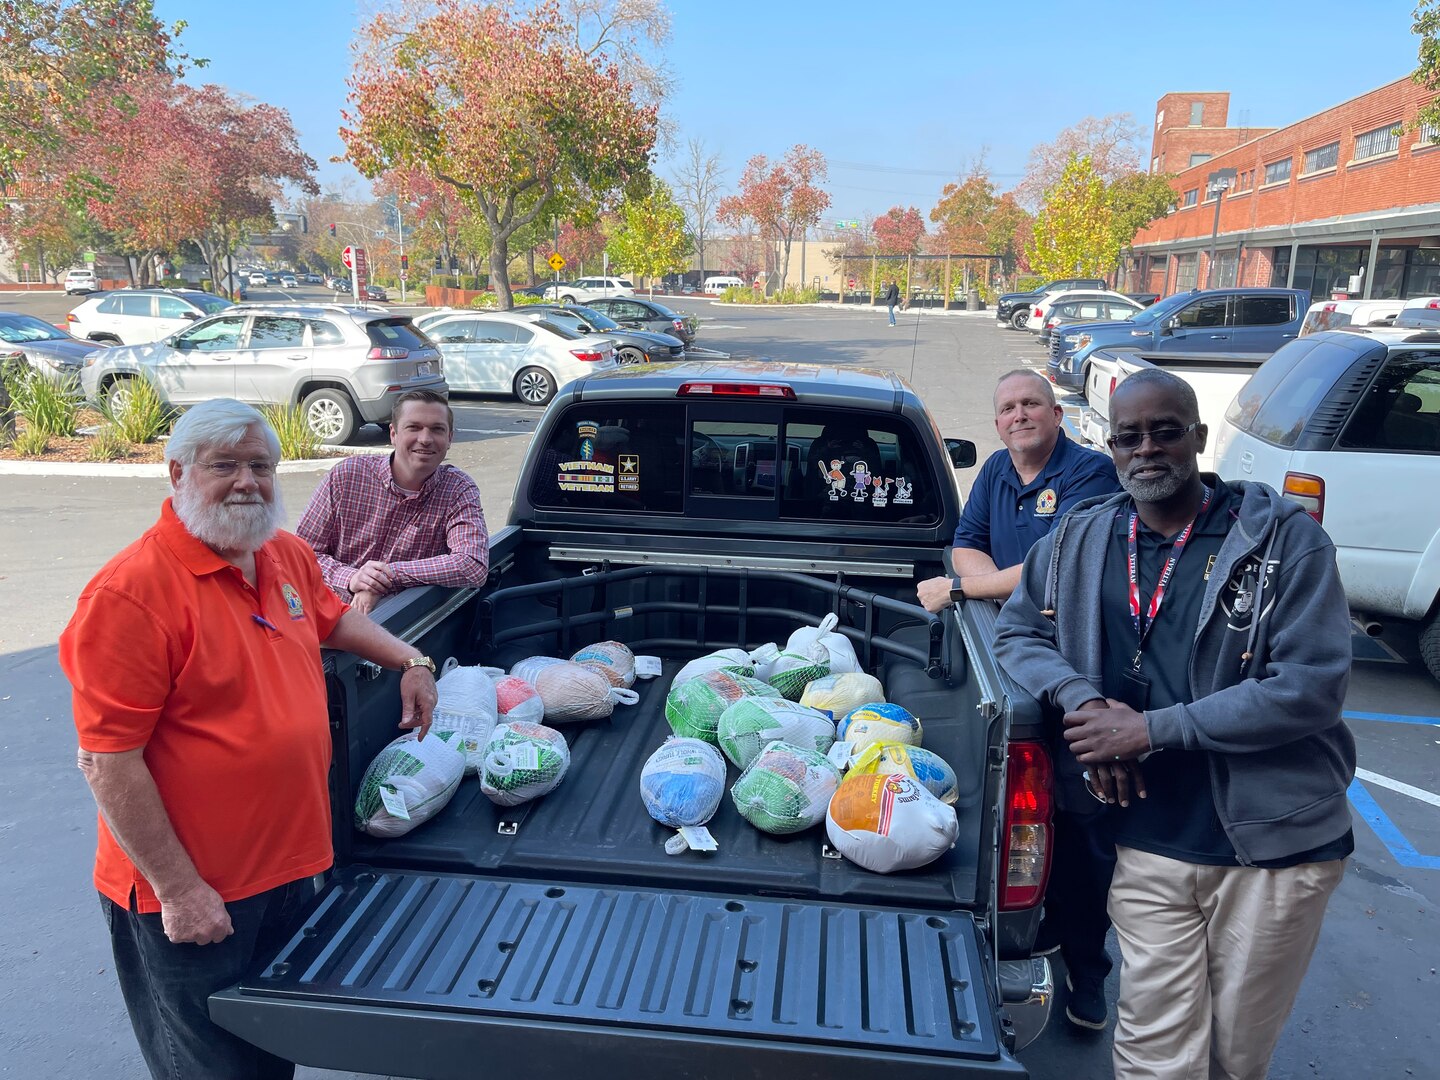 From the left: William King (processing supervisor), Spencer J. Albrecht (human resources assistant), Matthew P. McBride (test control officer) and Wallace A. Oliver (human resources assistant) are pictured in front of Sacramento MEPS during the turkey drive